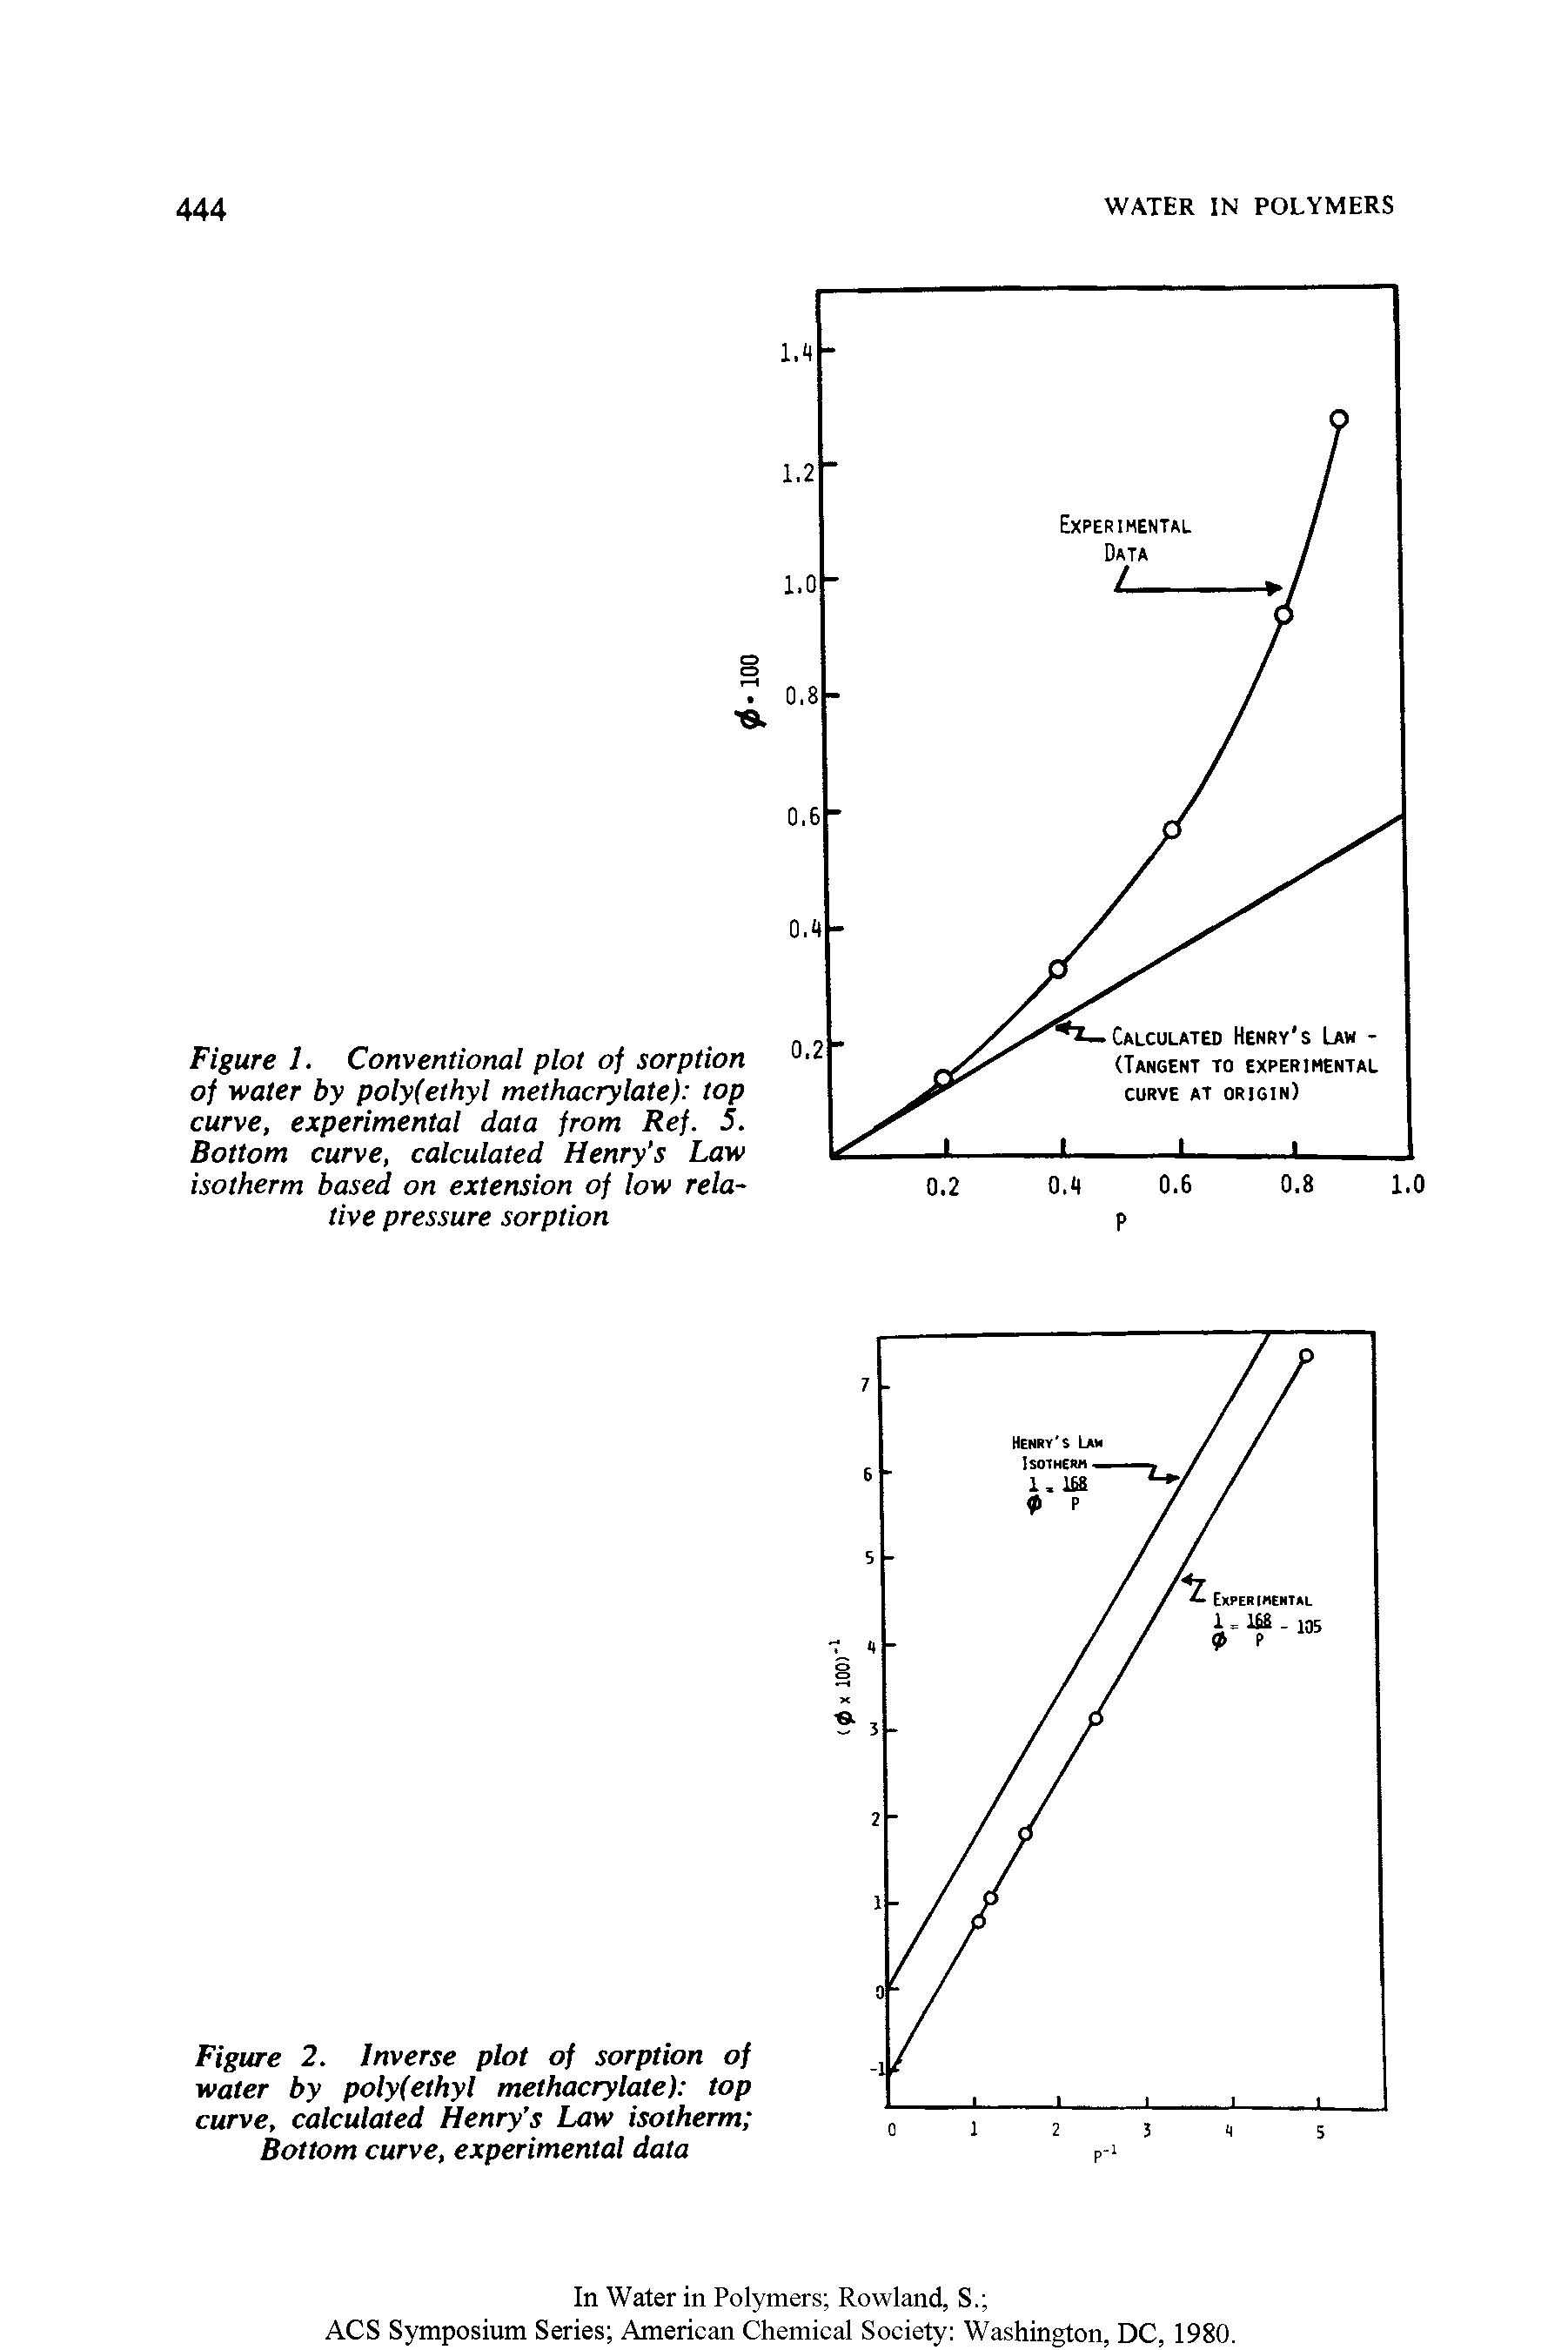 Figure 2. Inverse plot of sorption of water by poly(ethyl methacrylate) top curve, calculated Henry s Law isotherm Bottom curve, experimental data...